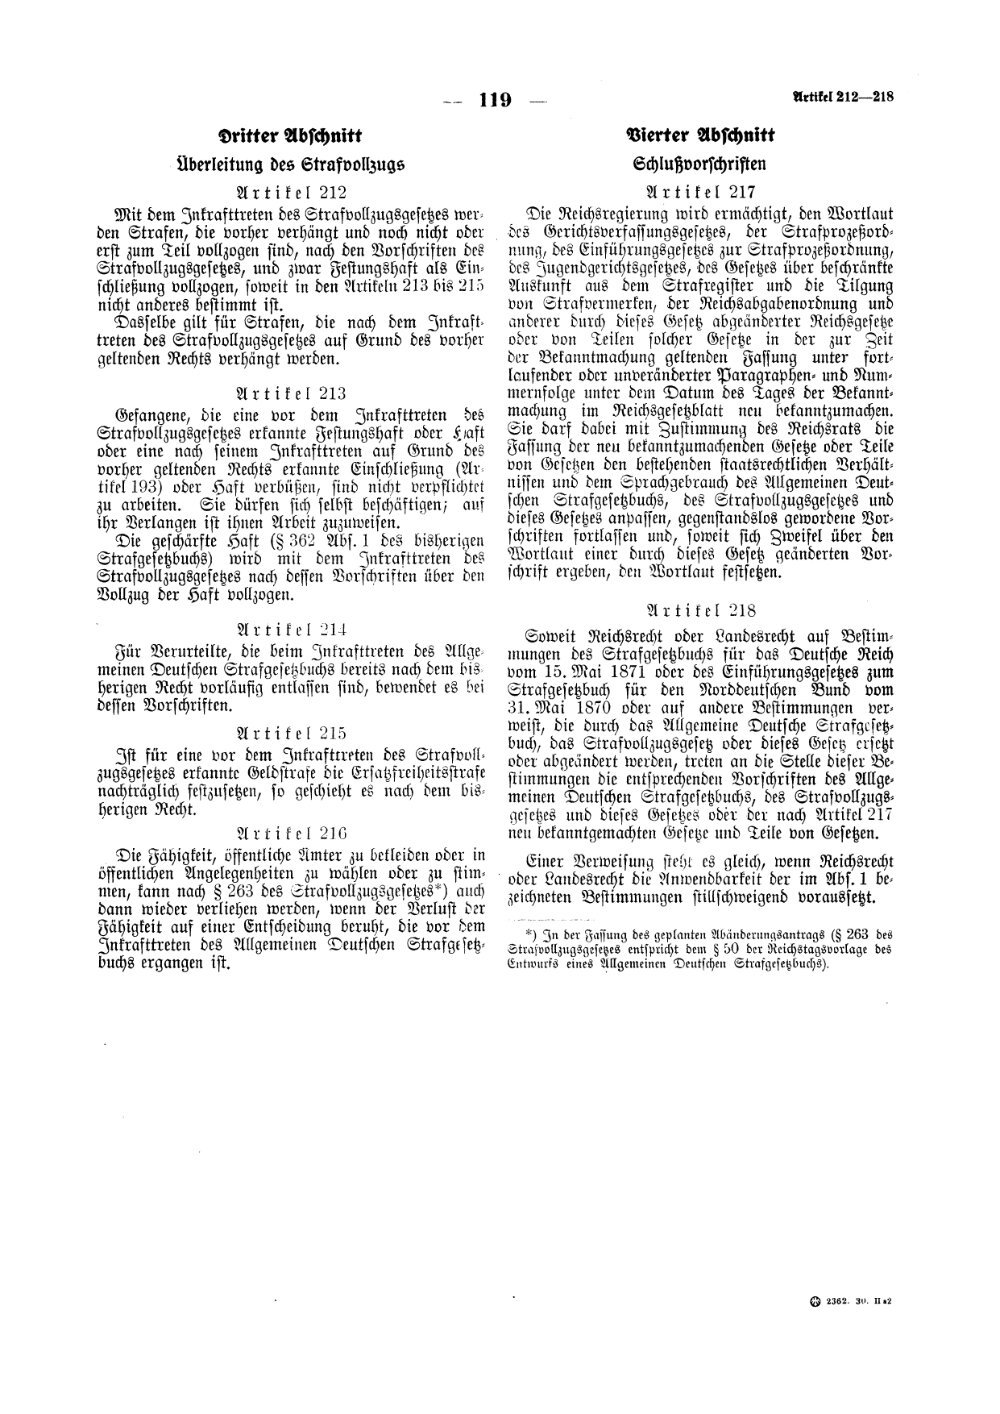 Scan of page 119